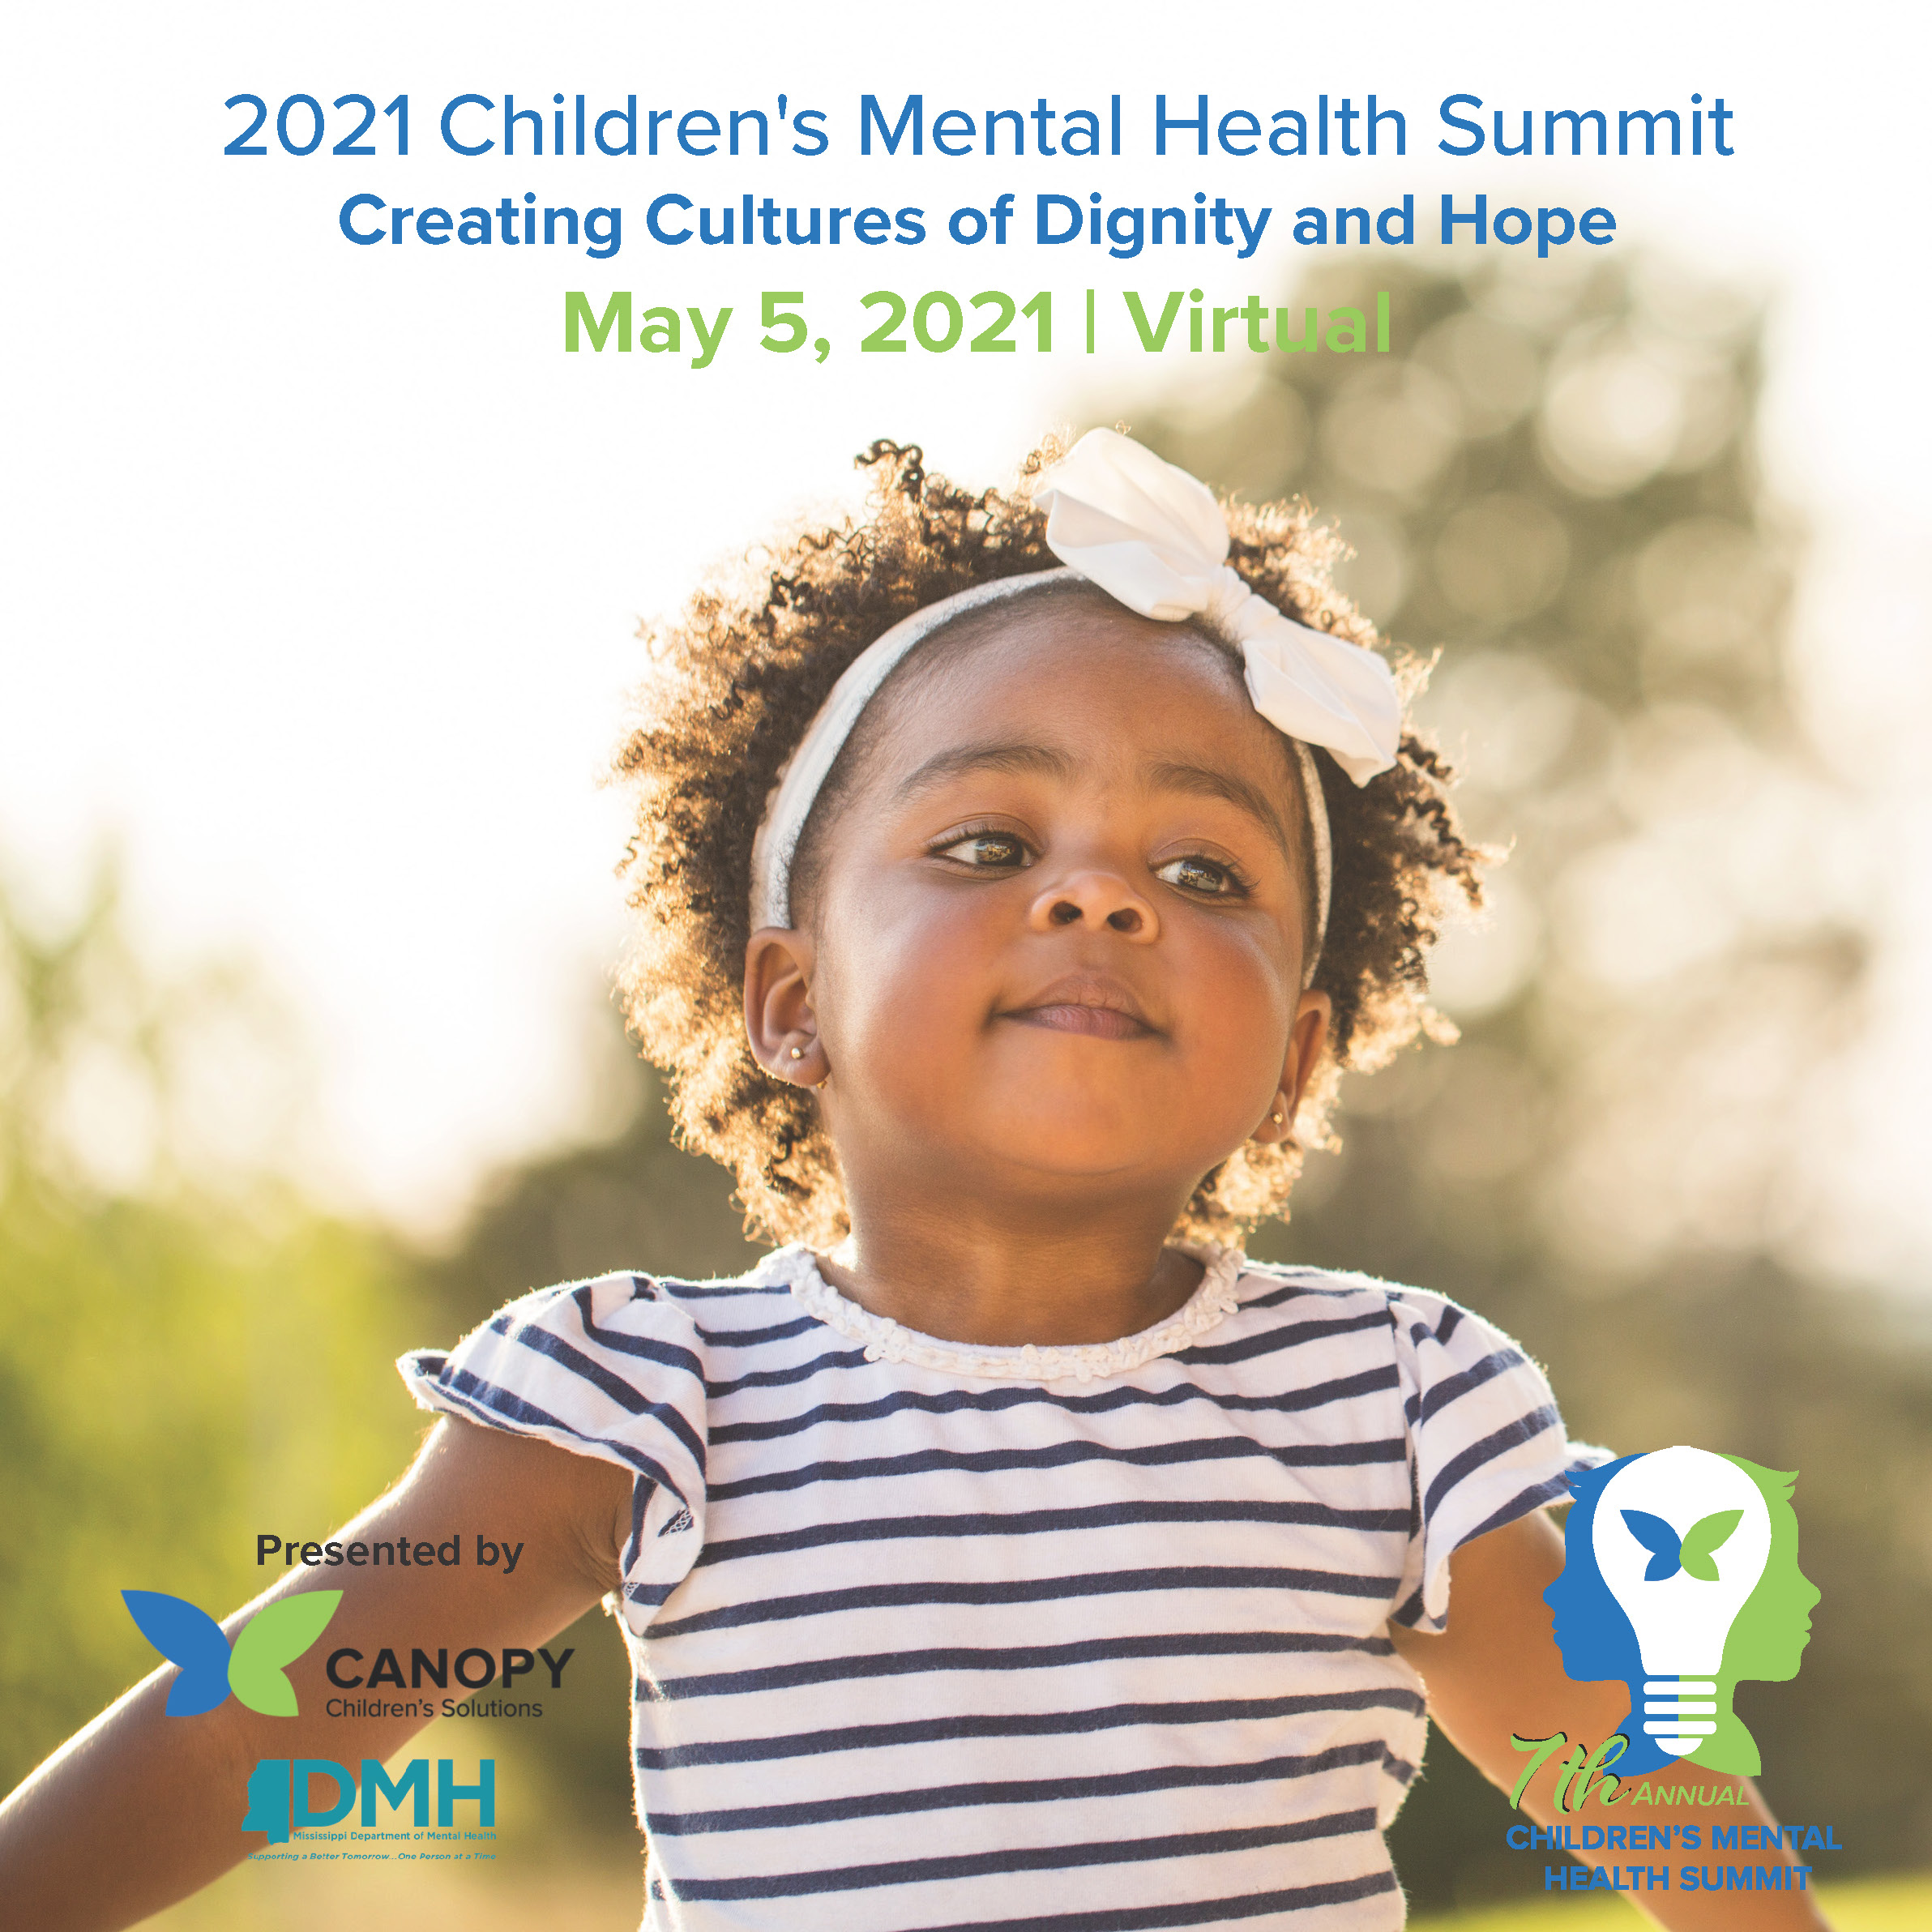 Children’s Mental Health Summit goes virtual on May 5